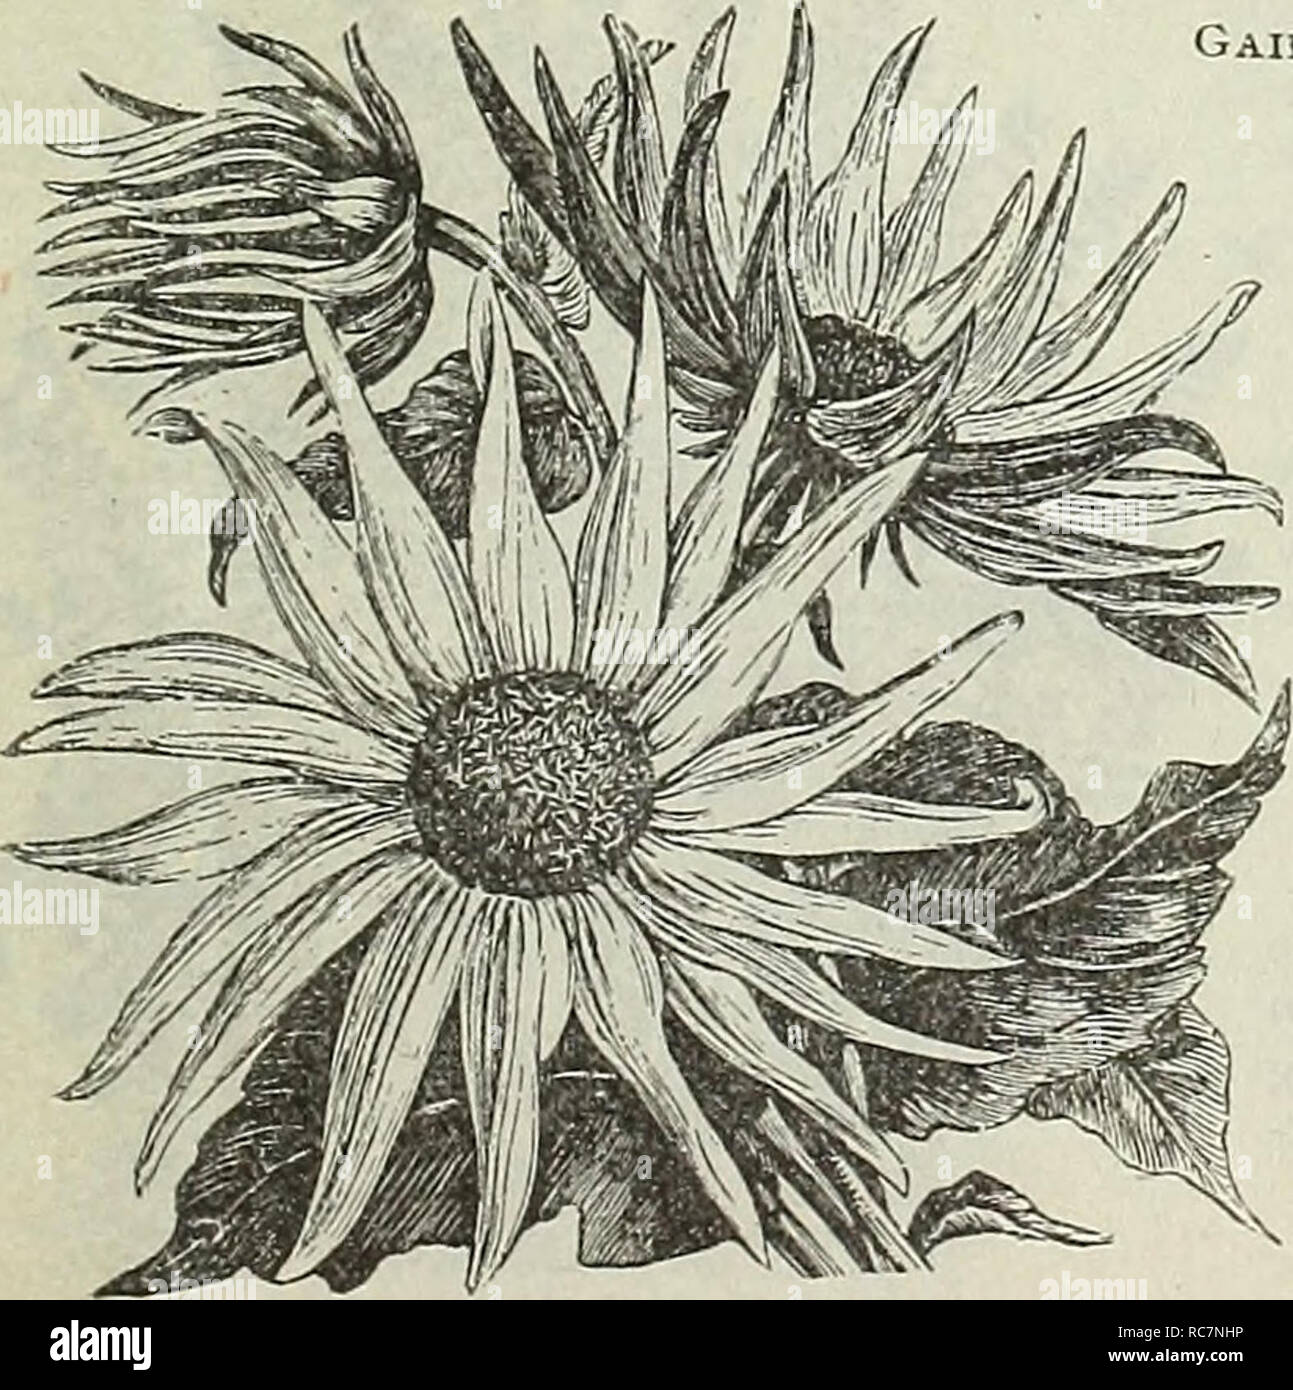 . Dreer's garden calendar : 1899. Seeds Catalogs; Nursery stock Catalogs; Gardening Equipment and supplies Catalogs; Flowers Seeds Catalogs; Vegetables Seeds Catalogs; Fruit Seeds Catalogs. Excelsior Single Dahlias. New Forget-Me-Not, &quot;Star of Love.&quot; 6124 This novelty resembles the well â known Myosotis Victoria, but is much dwarfer, more regular in growth, freer flowering, and has a longer flowering season than any variety. Coming into bloom a week before any other, and is still bright with flowers when they are over. The color is a true Forget-Me-Not blue, so bright that a patch of Stock Photo